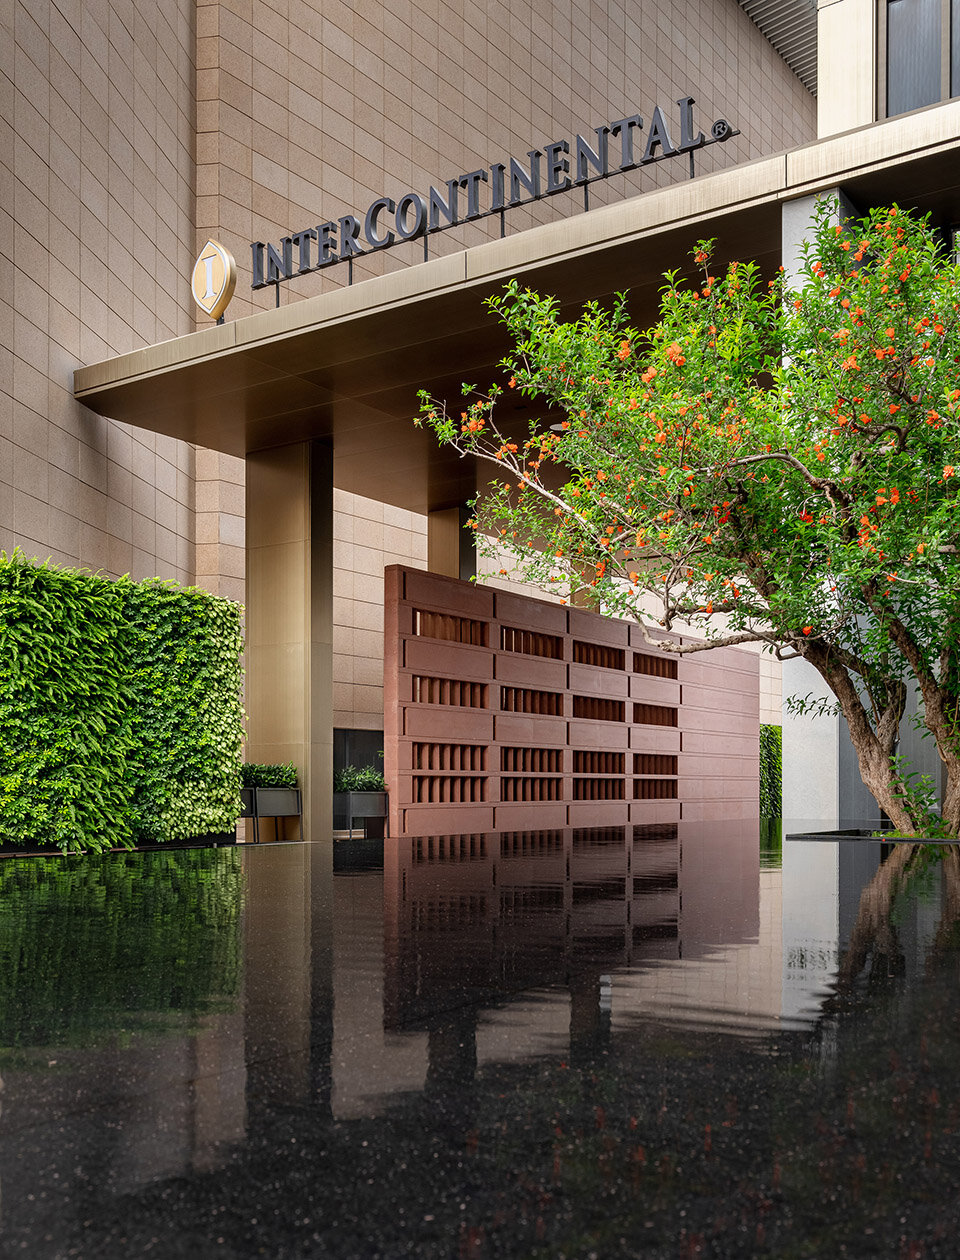 The entrance design of InterContinental Hotel